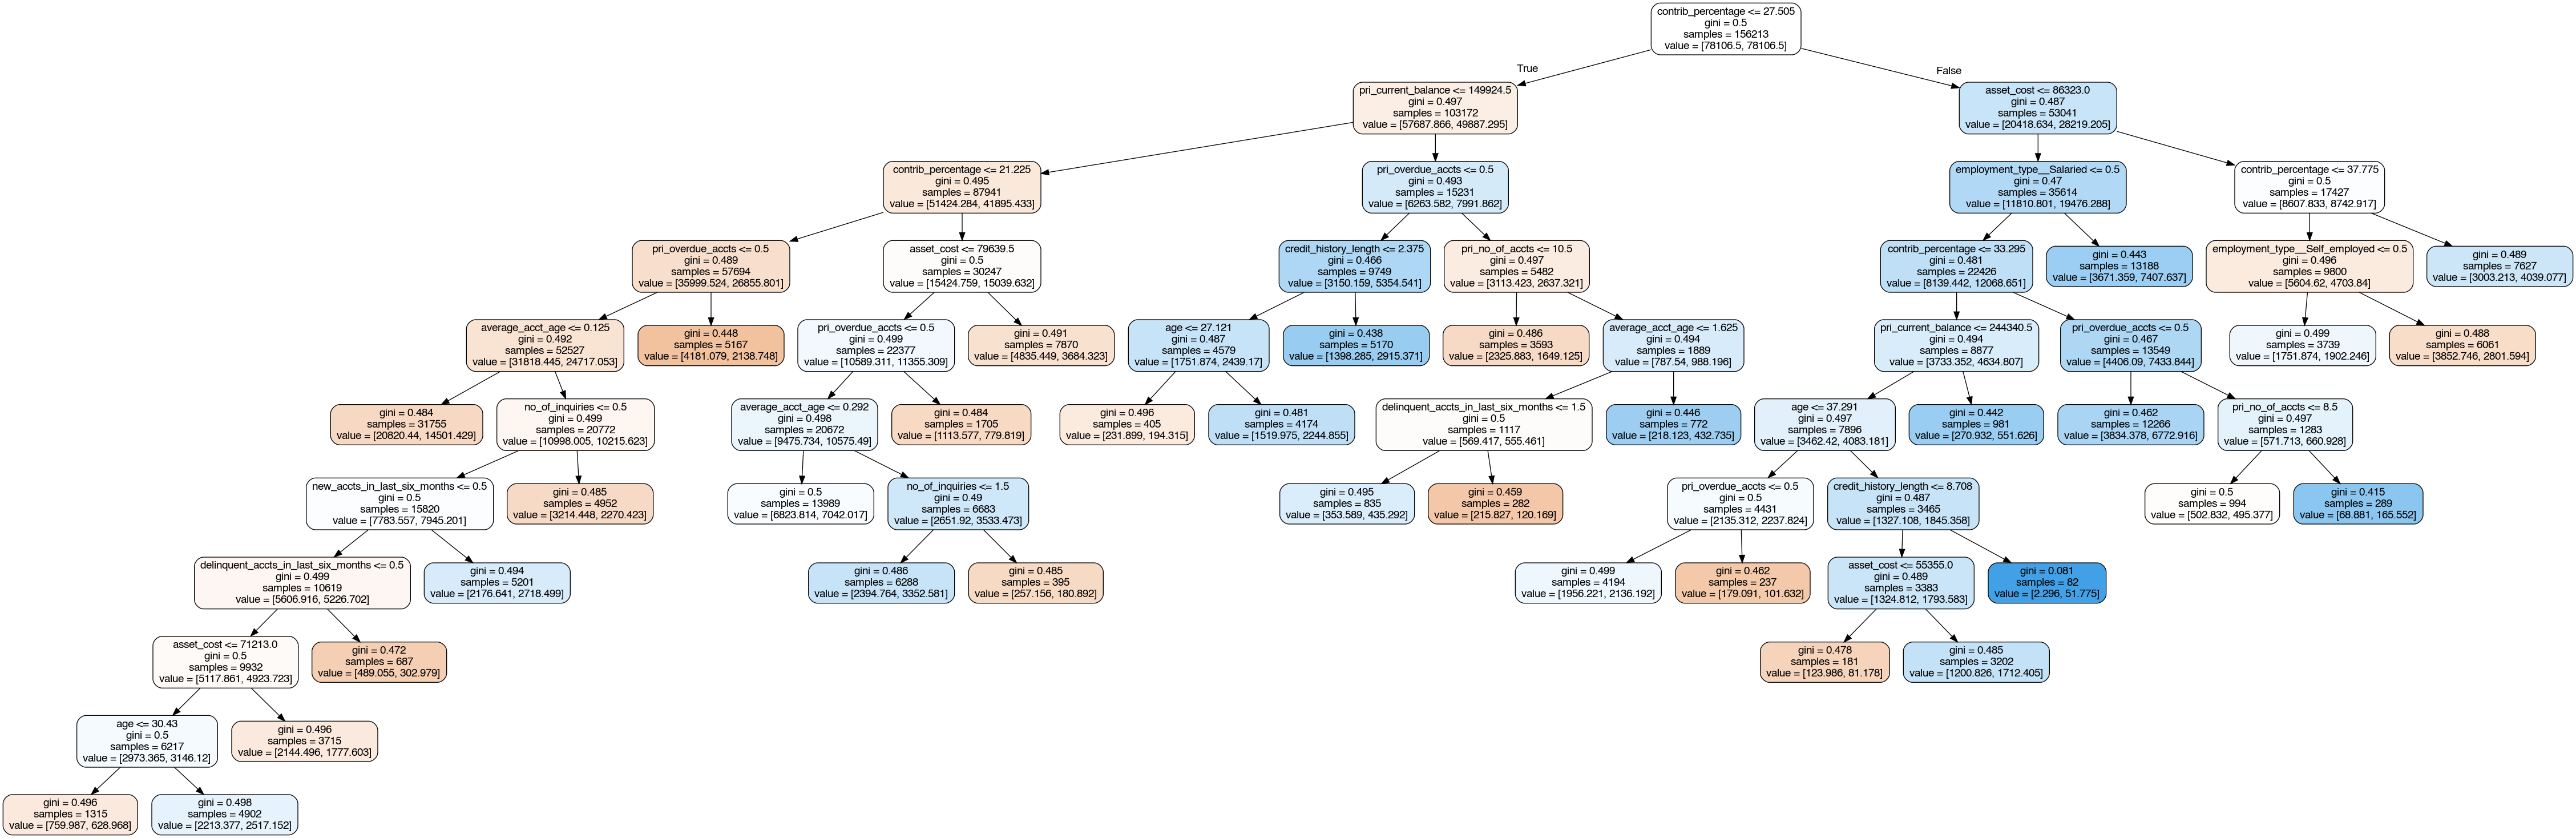 decision_tree_adult.png